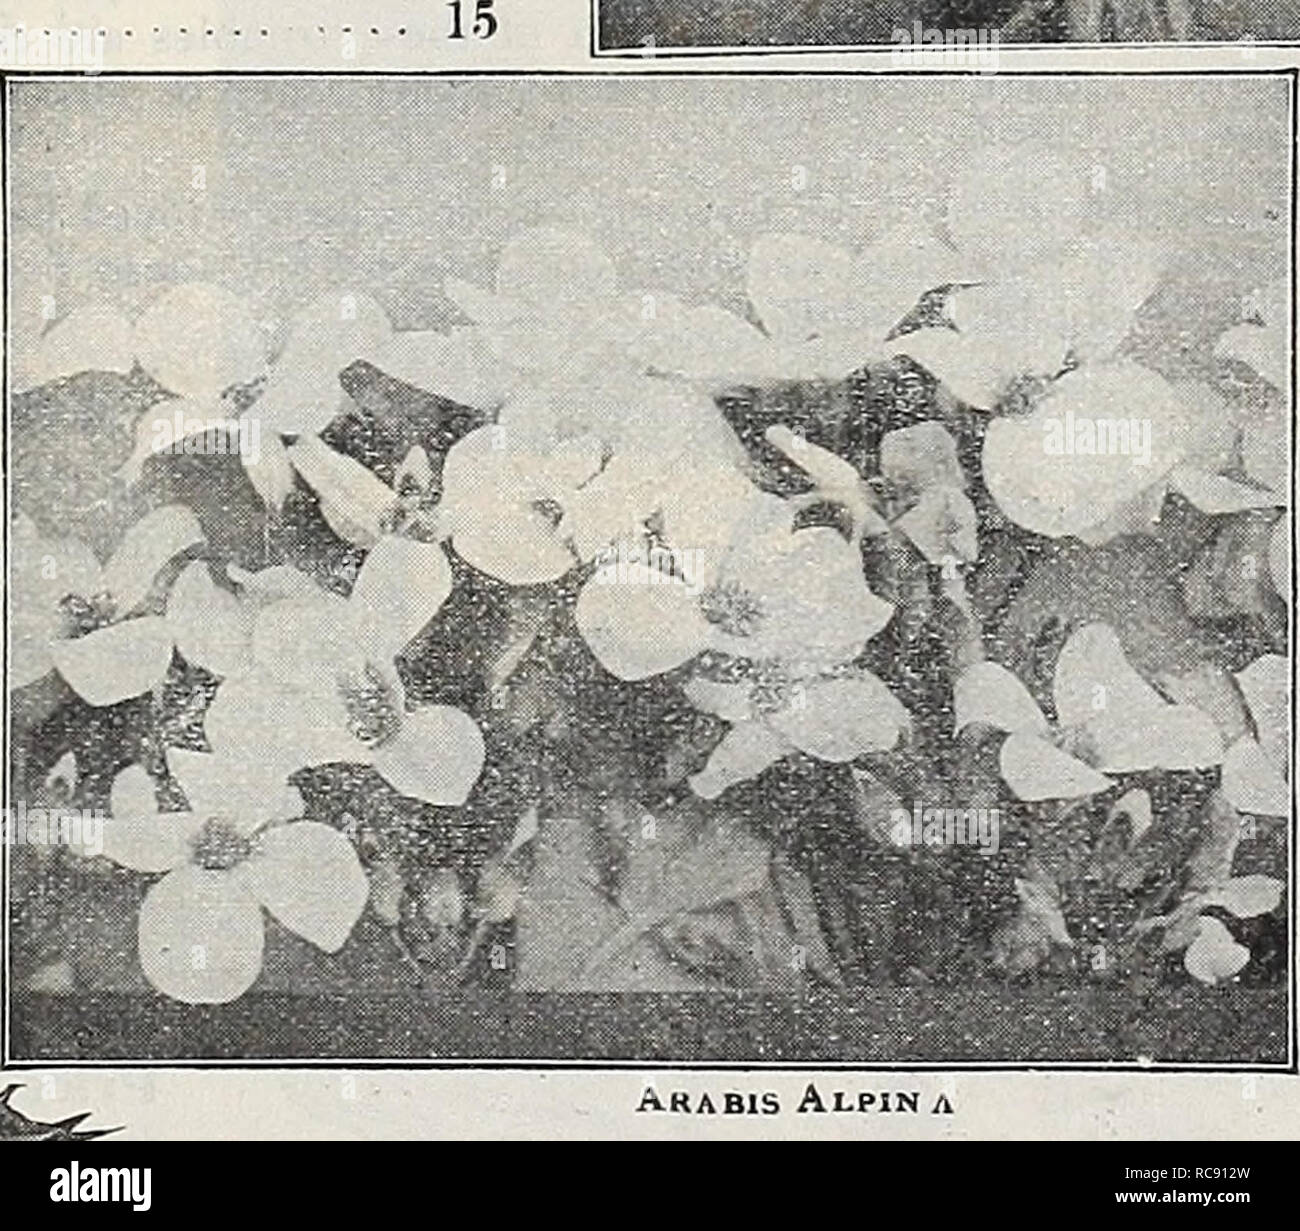 . Dreer's garden book 1918. Seeds Catalogs; Nursery stock Catalogs; Gardening Equipment and supplies Catalogs; Flowers Seeds Catalogs; Vegetables Seeds Catalogs; Fruit Seeds Catalogs. Akabis Alpina Argemone Hybrida Grandiflora Arctotis Grandis ARGEMONE (Mexican or Prickly Poppy) PBK PKT. 1220 Hybrida Grandiflora. We were delight- ed with a trial of this in om experi- mental grounds. The plants grew into sturdy bushes about 3 feet high, with very ornamental pale green, spiny foliage, with clear silvery midrib and veins and poppy-like flowers of satiny texture, over 3 inches across, in vari- ous Stock Photo